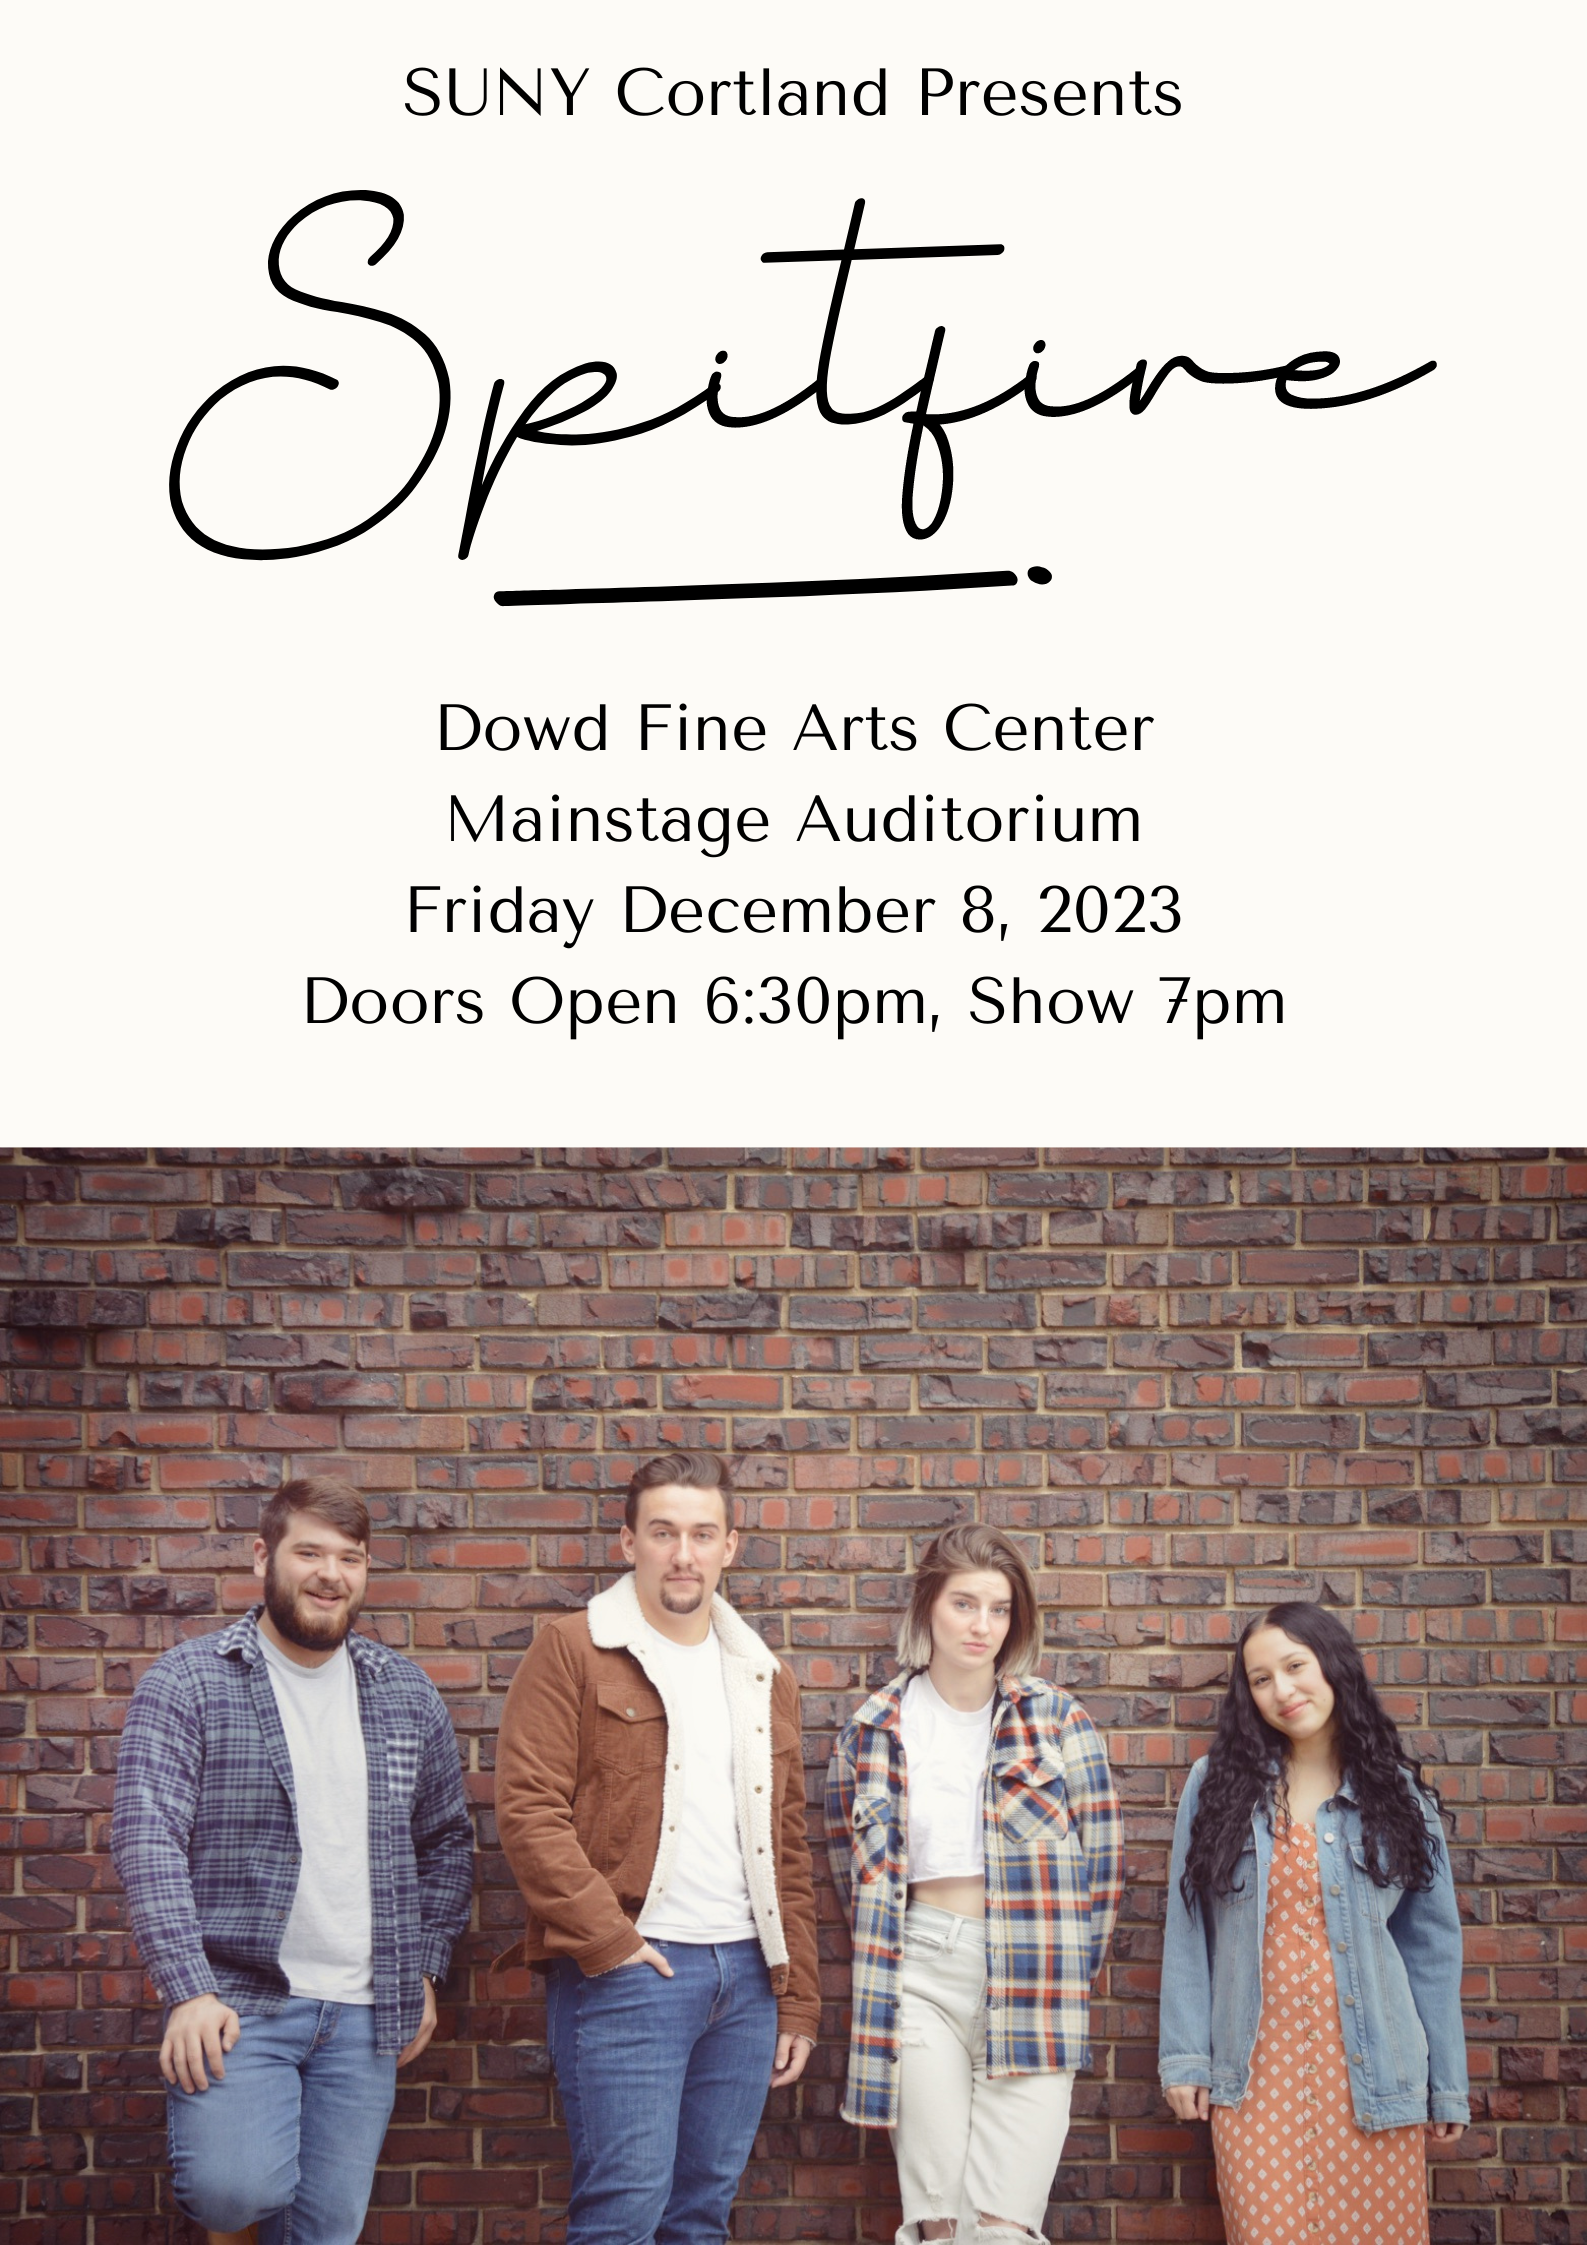 A photo of four singers, with text reading "SUNY Cortland Presents: Spitfire. Dowd Fine Arts Center, Mainstage Auditorium. Friday December 8, 2023. Doors open 6:30 p.m. Show 7 p.m.